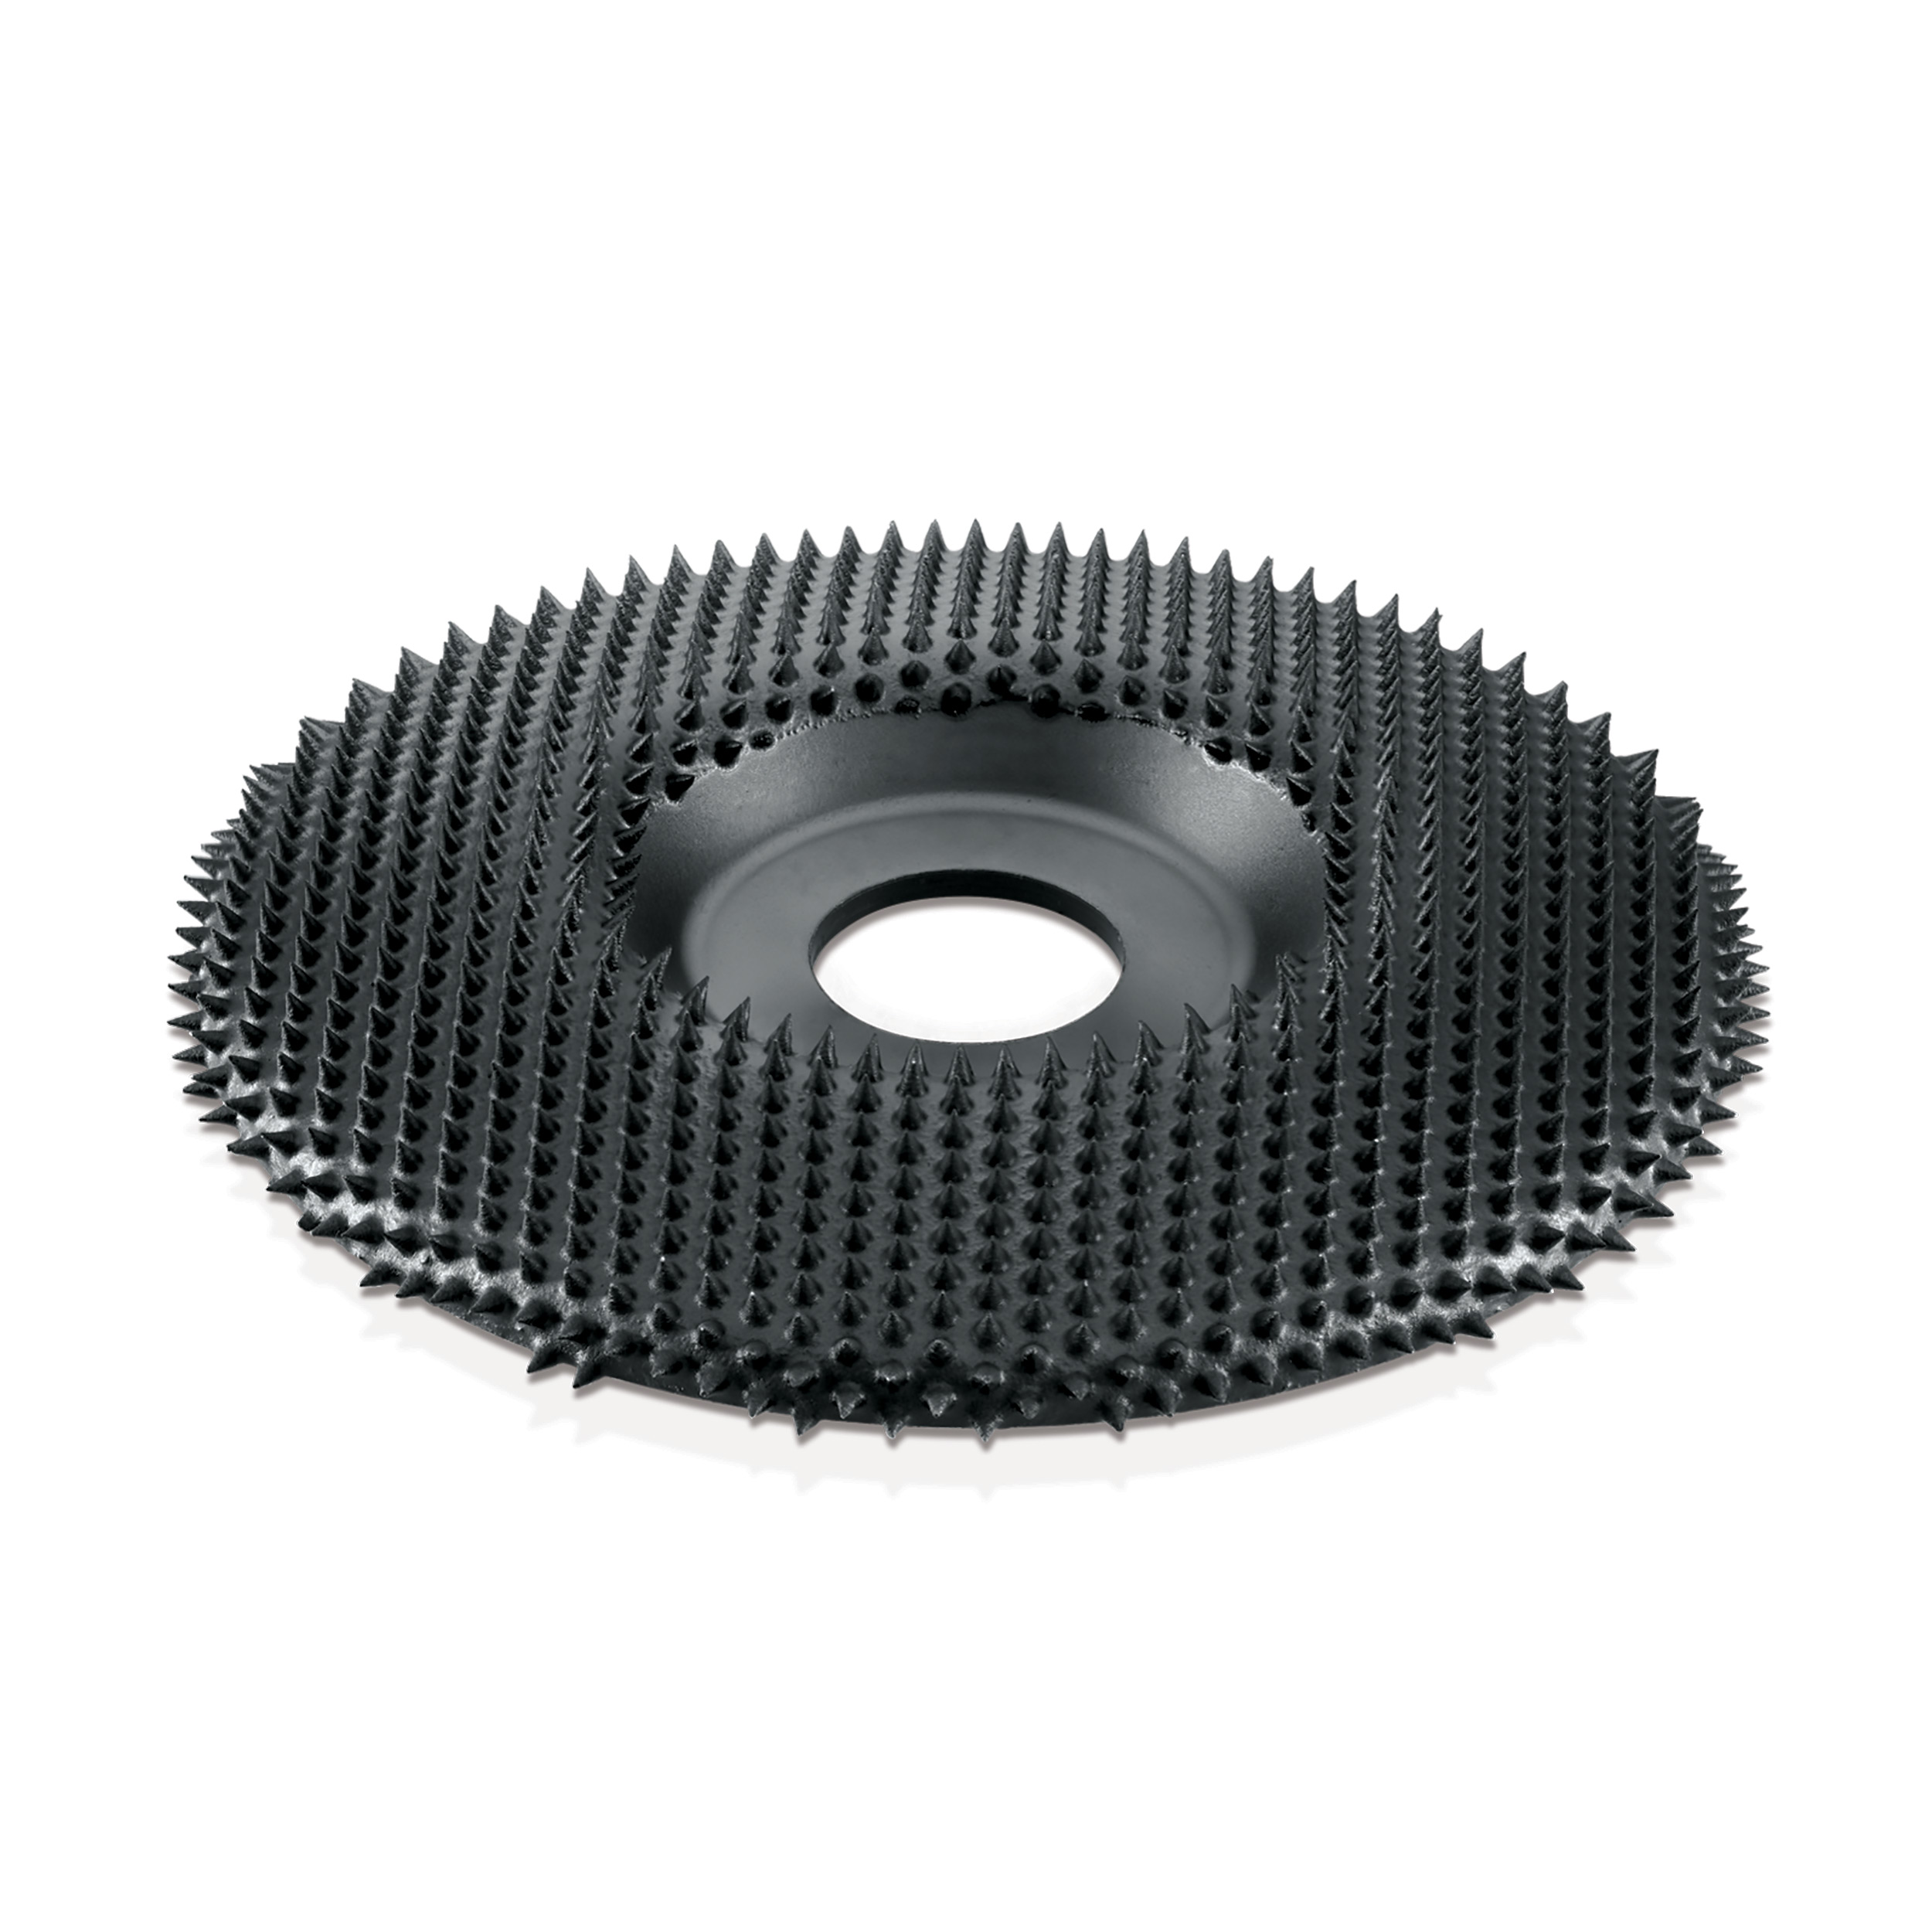 Extreme Shaping Disc, 4-1/2" Diameter, Very Coarse